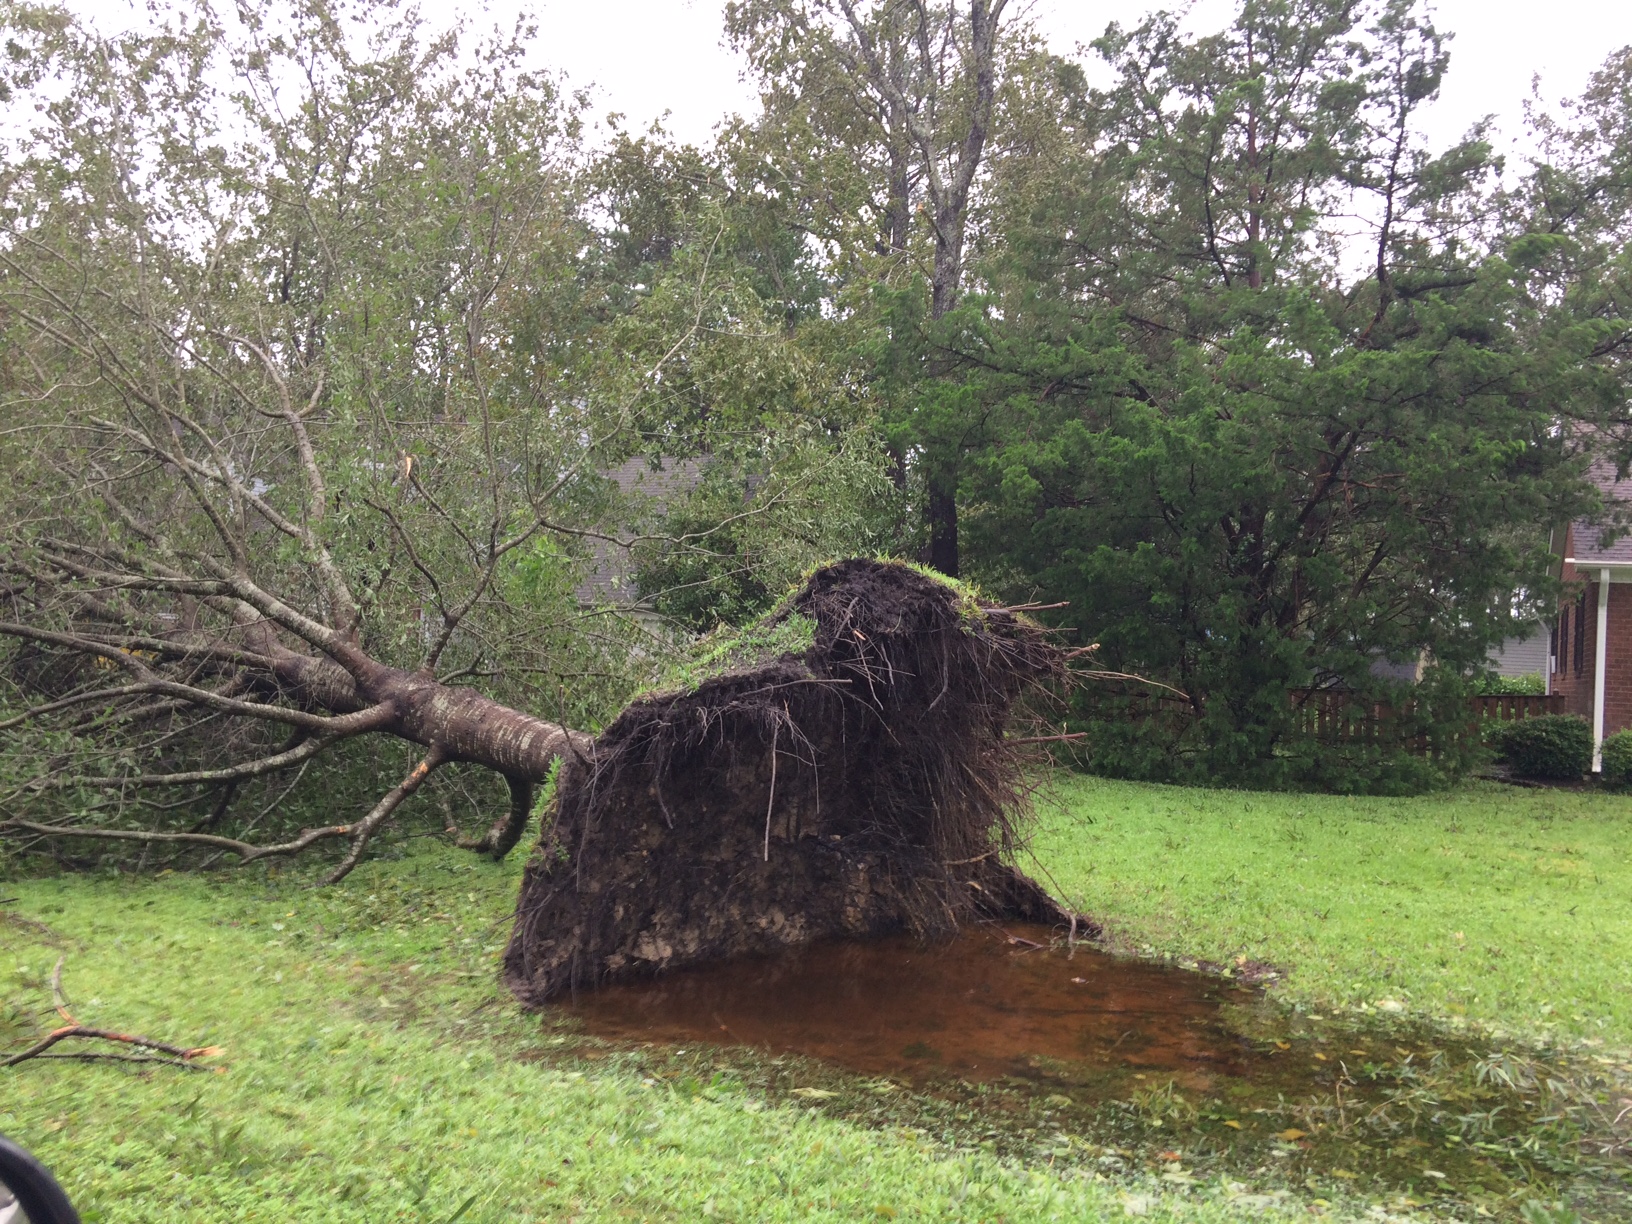 A picture of a tree uprooted from the ground.